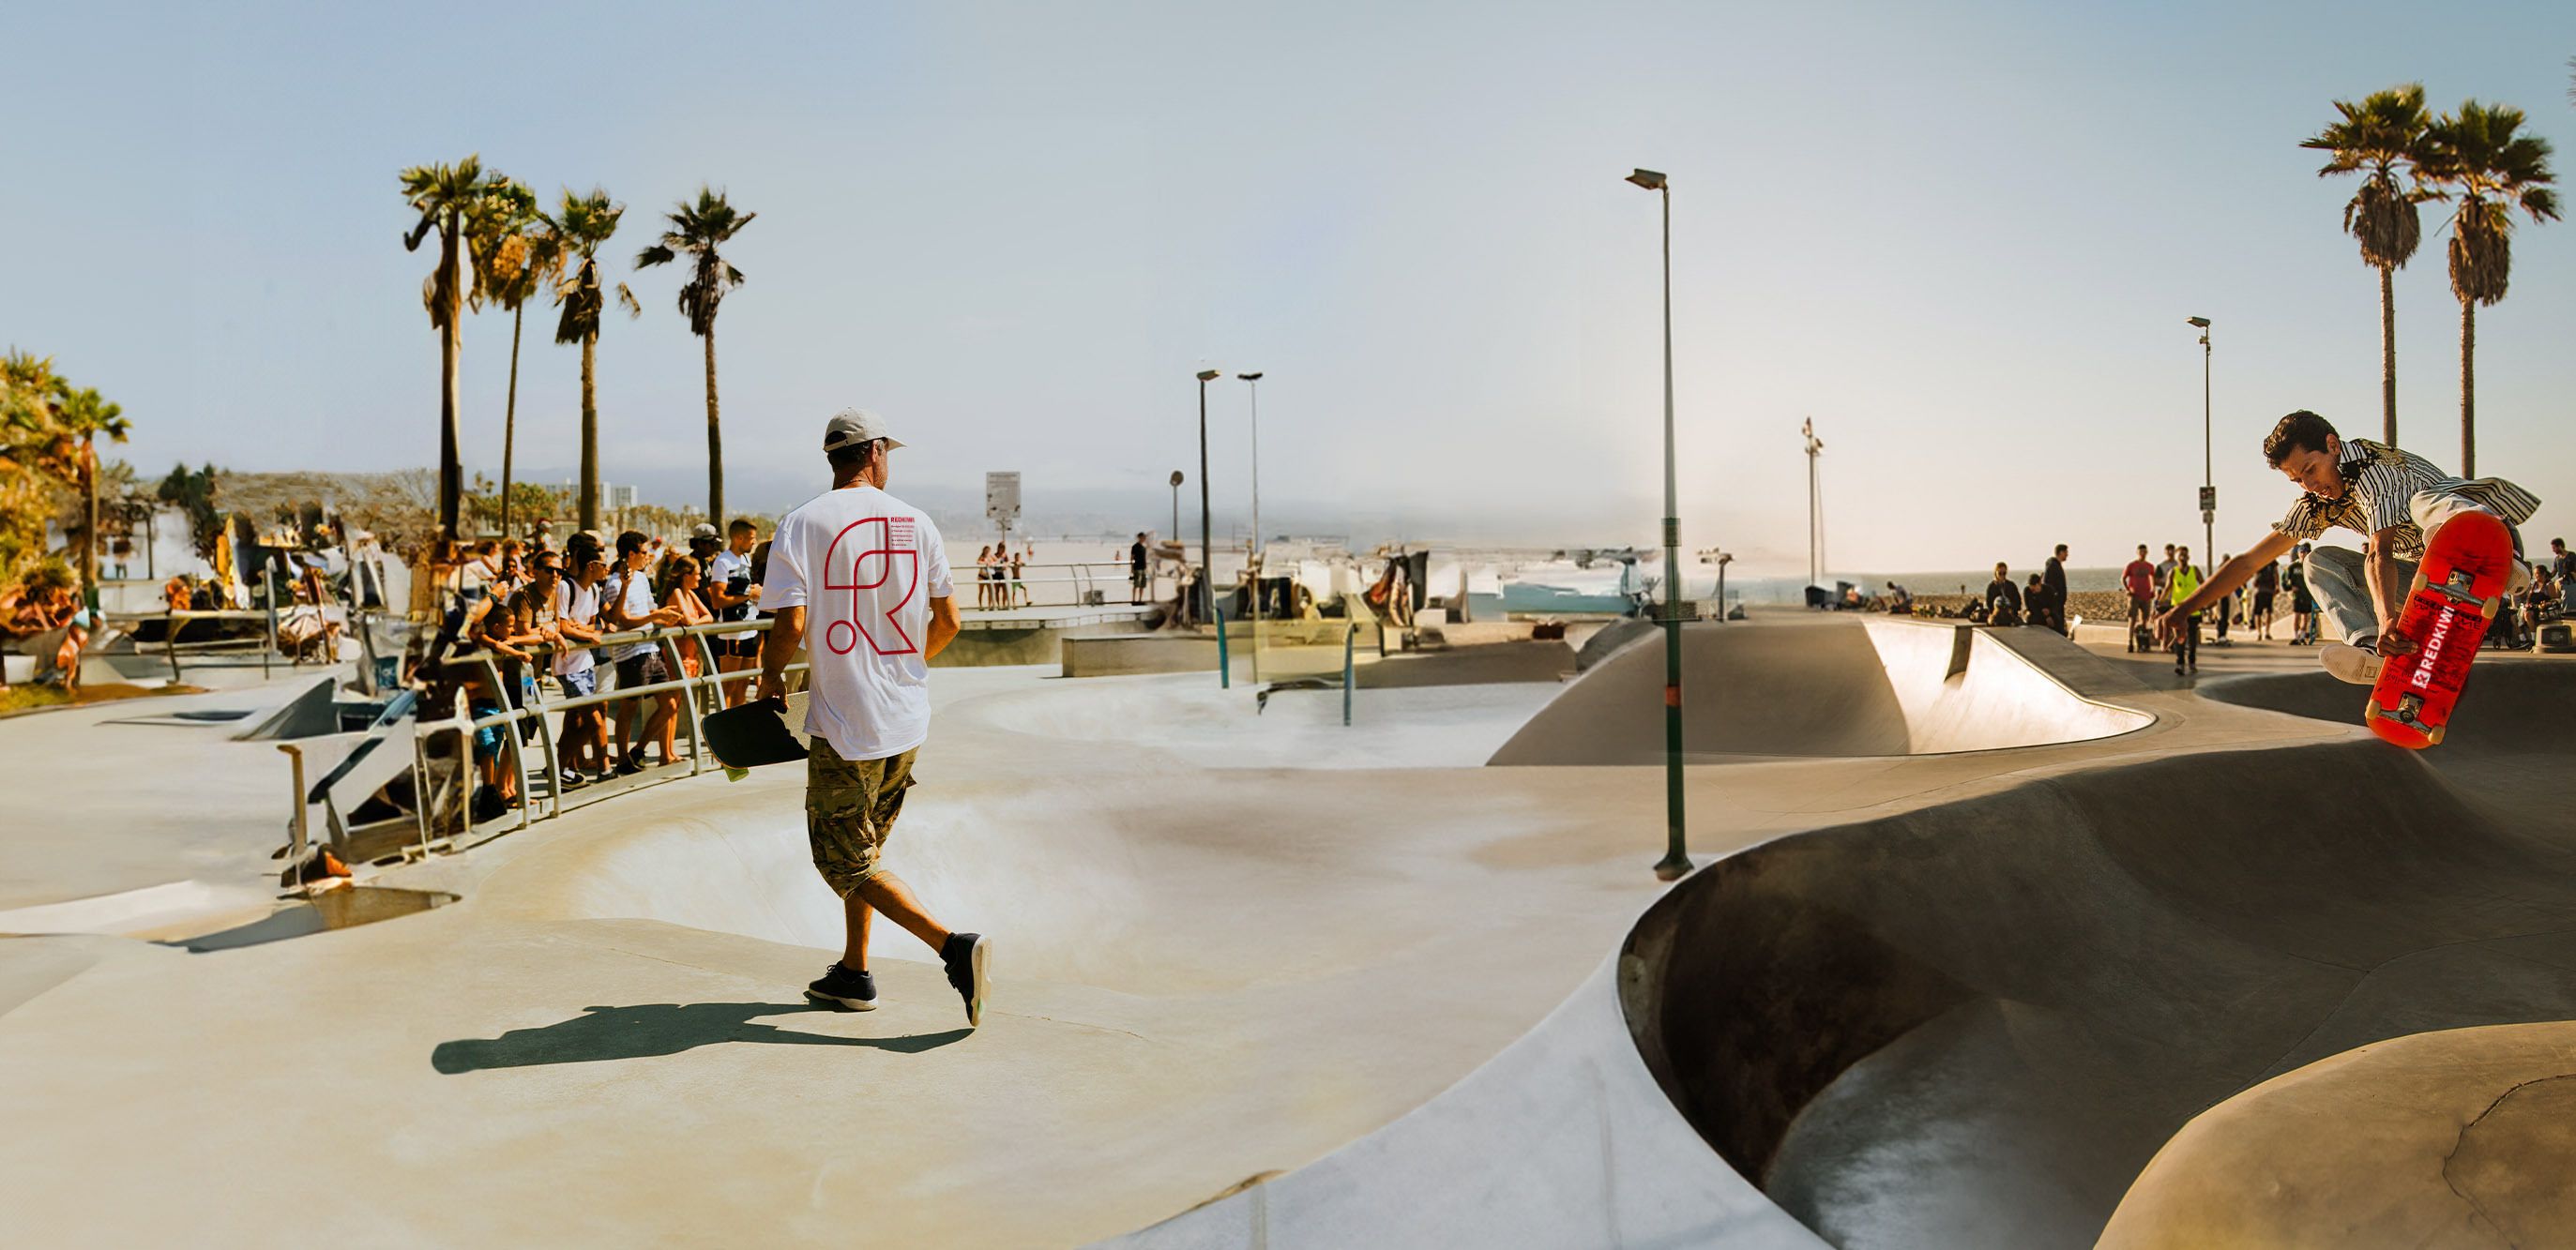 Redkiwi header our culture. Men in skateboarding park wearing Redkiwi t-shirt.